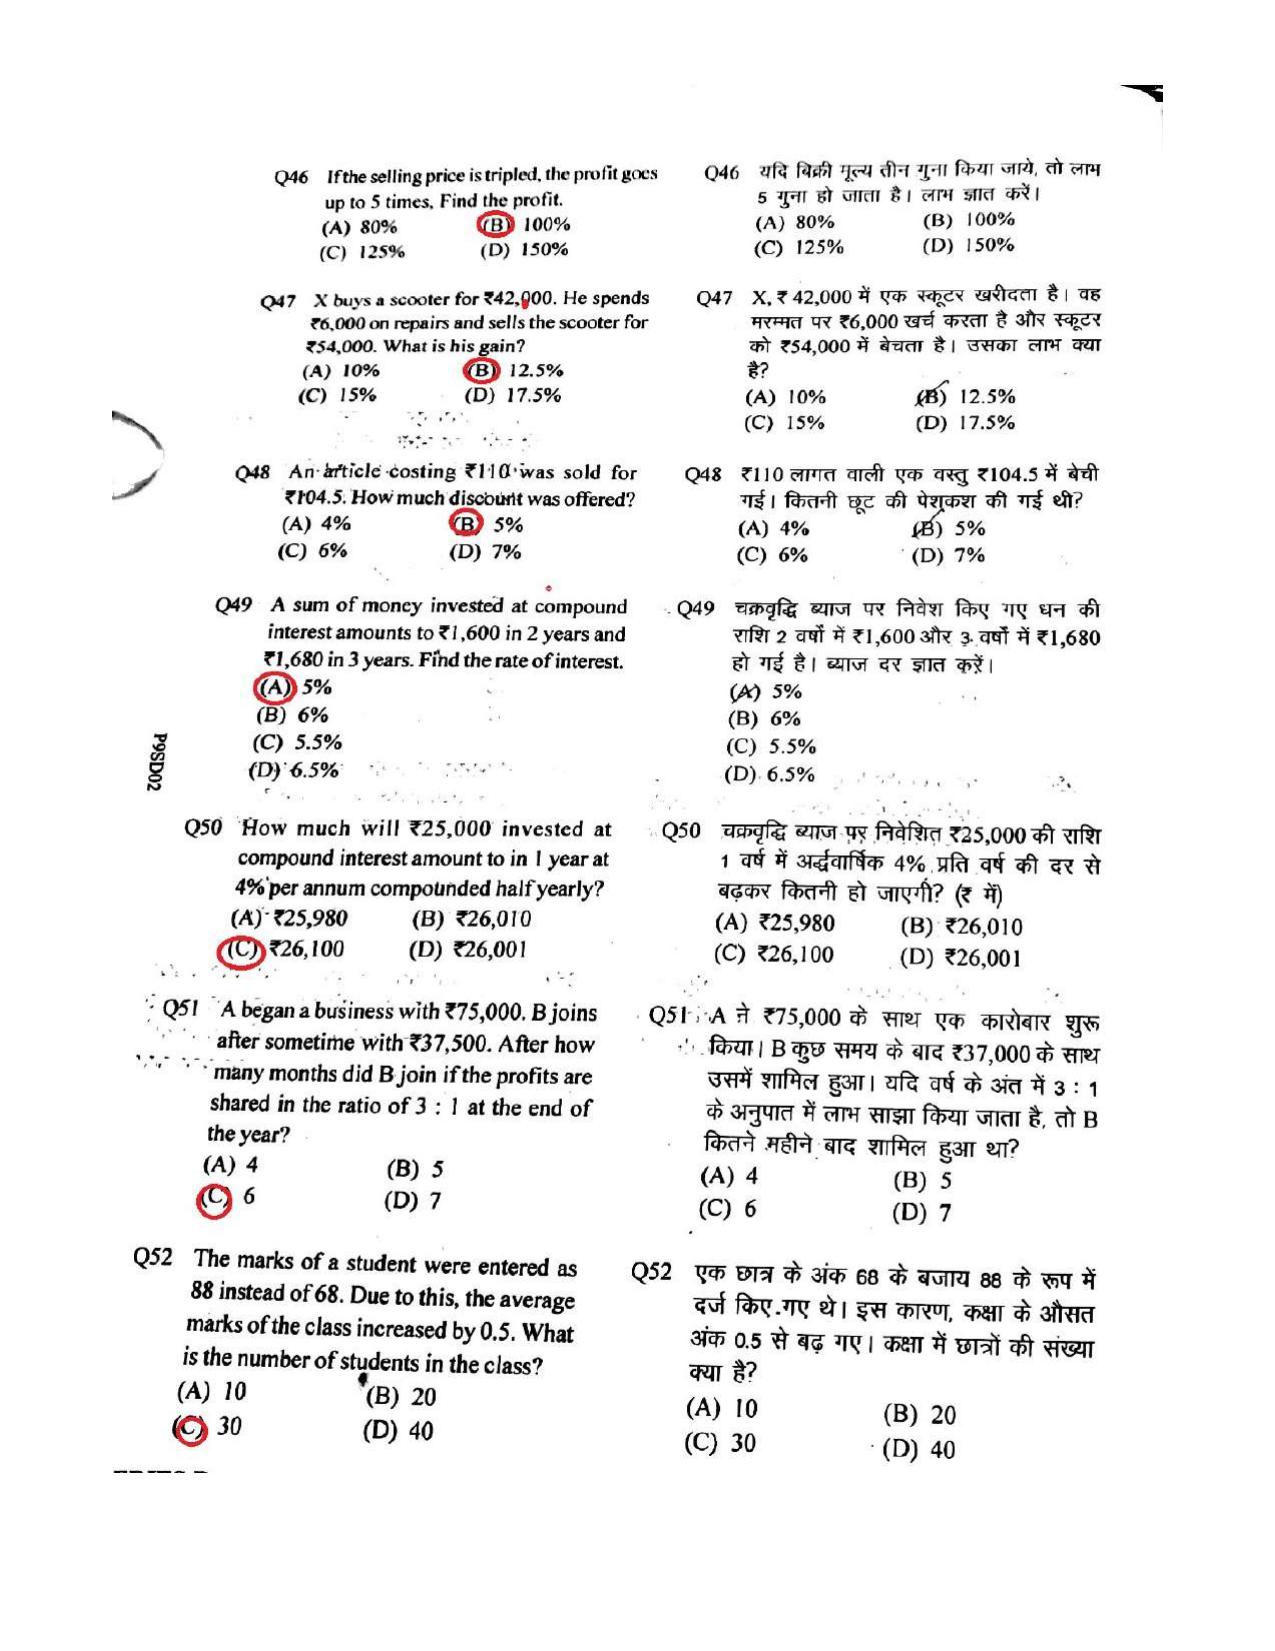 UPPRPB Police Constable Question Papers Jan 27, 2019 - Page 20